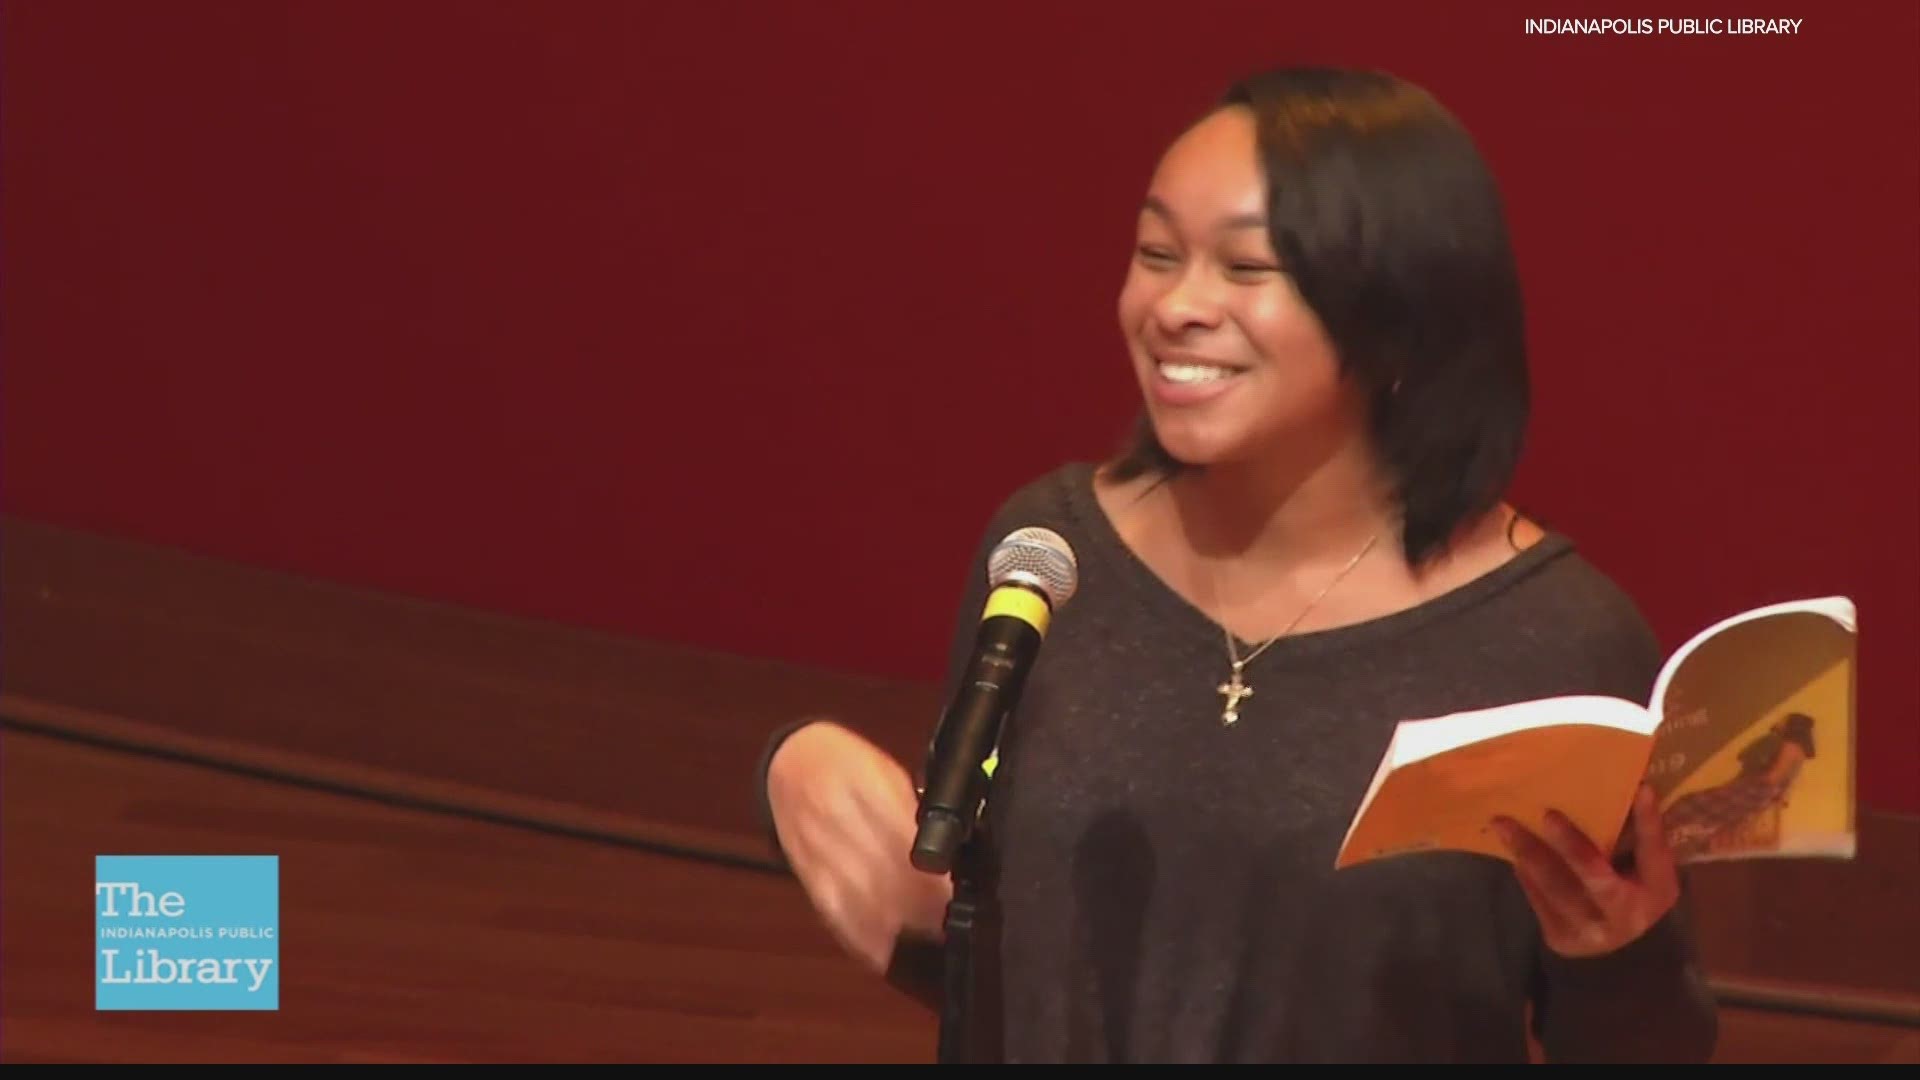 Alyssa Gaines is embracing the spotlight put on poetry by the first National Youth Poet Laureate Amanda Gorman at the inauguration.